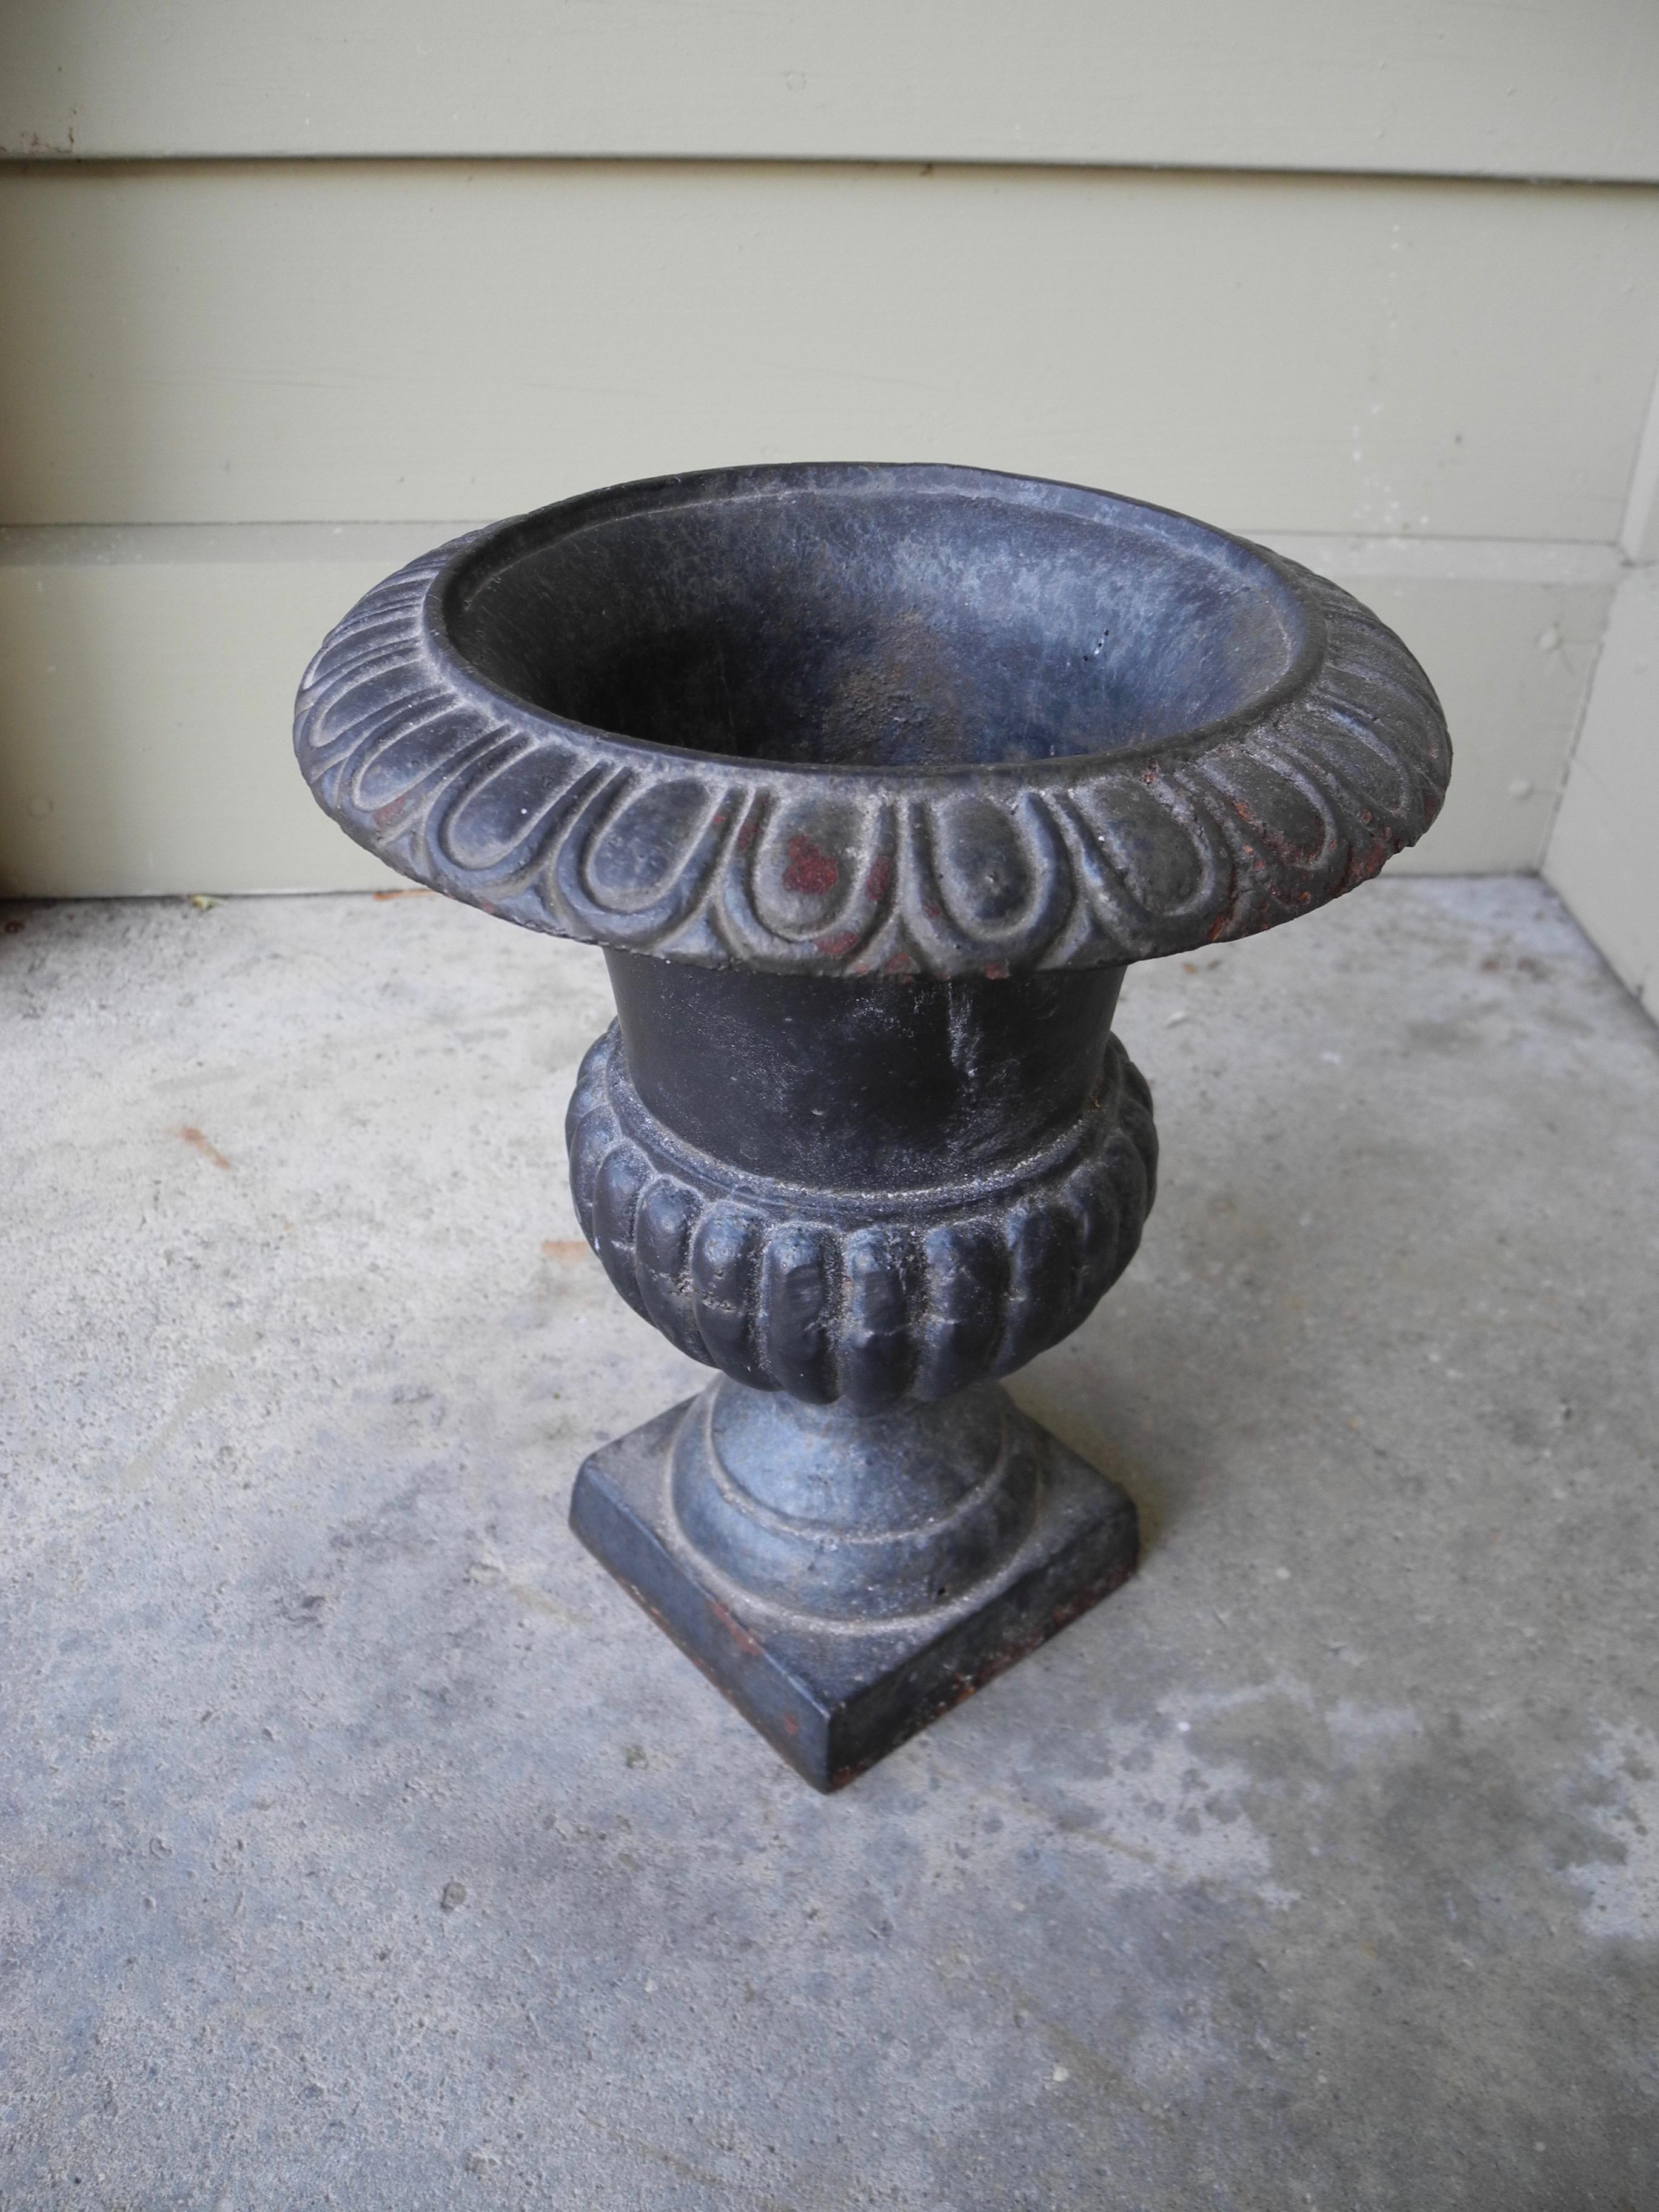 This Classic Greek design is great for center pieces in the home or outdoors. This one is small and measures 9 inches tall by 8 inches in diameter.